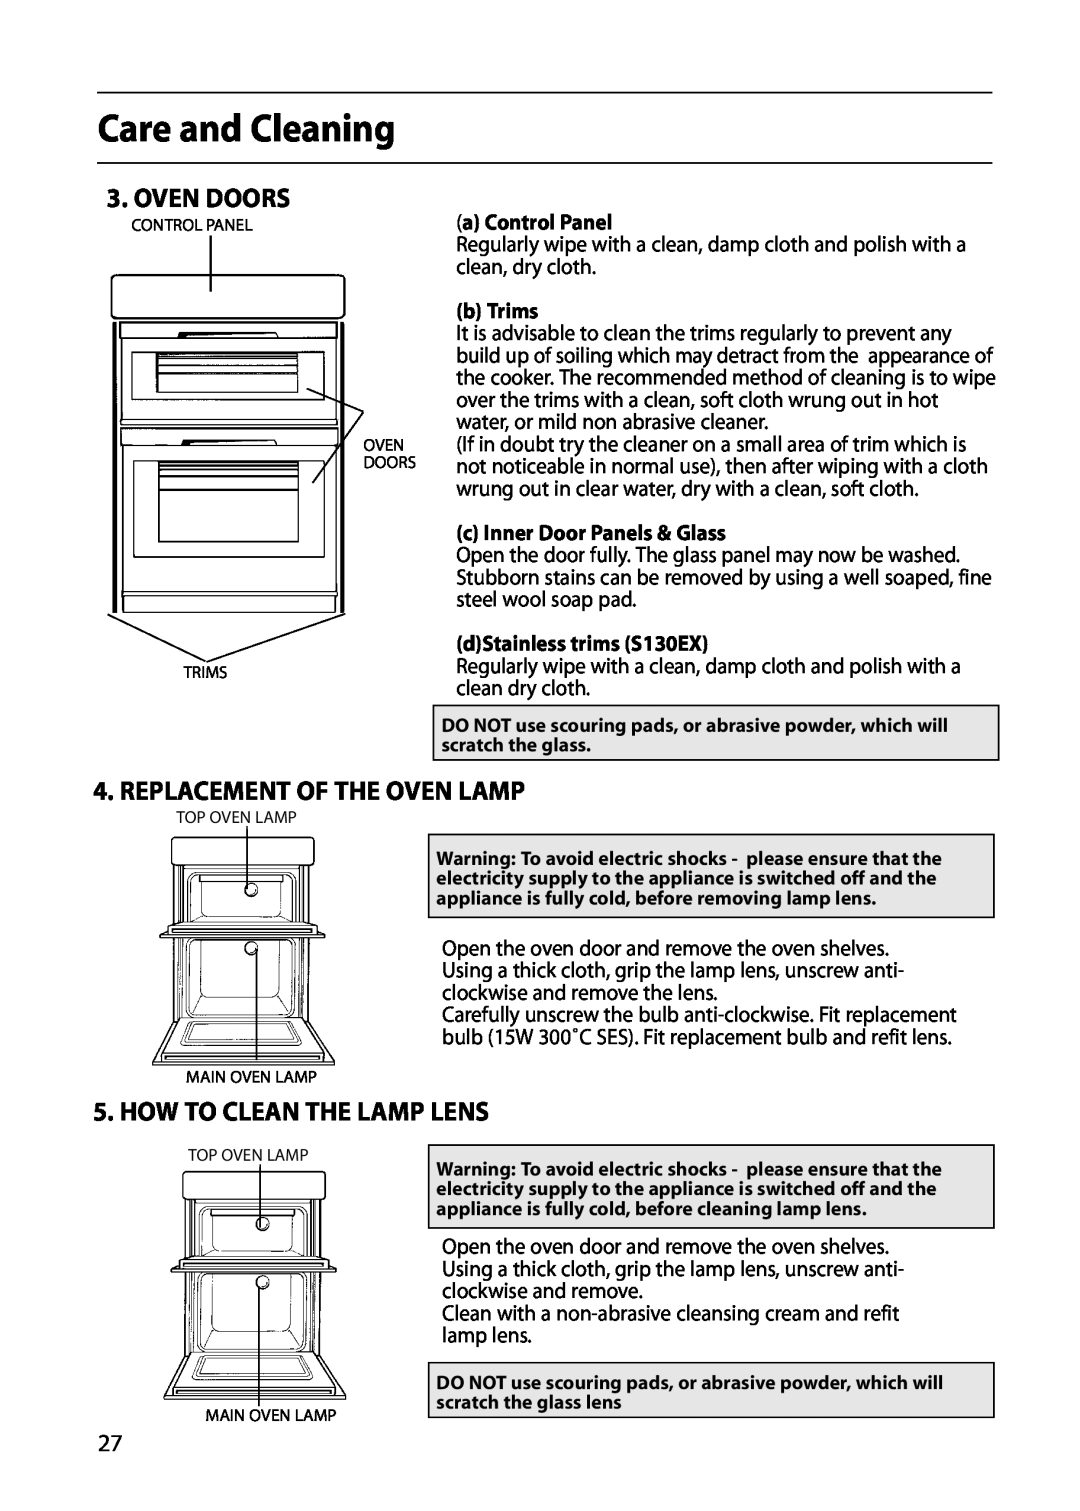 Hotpoint S130E Care and Cleaning, Oven Doors, Replacement Of The Oven Lamp, How To Clean The Lamp Lens, a Control Panel 